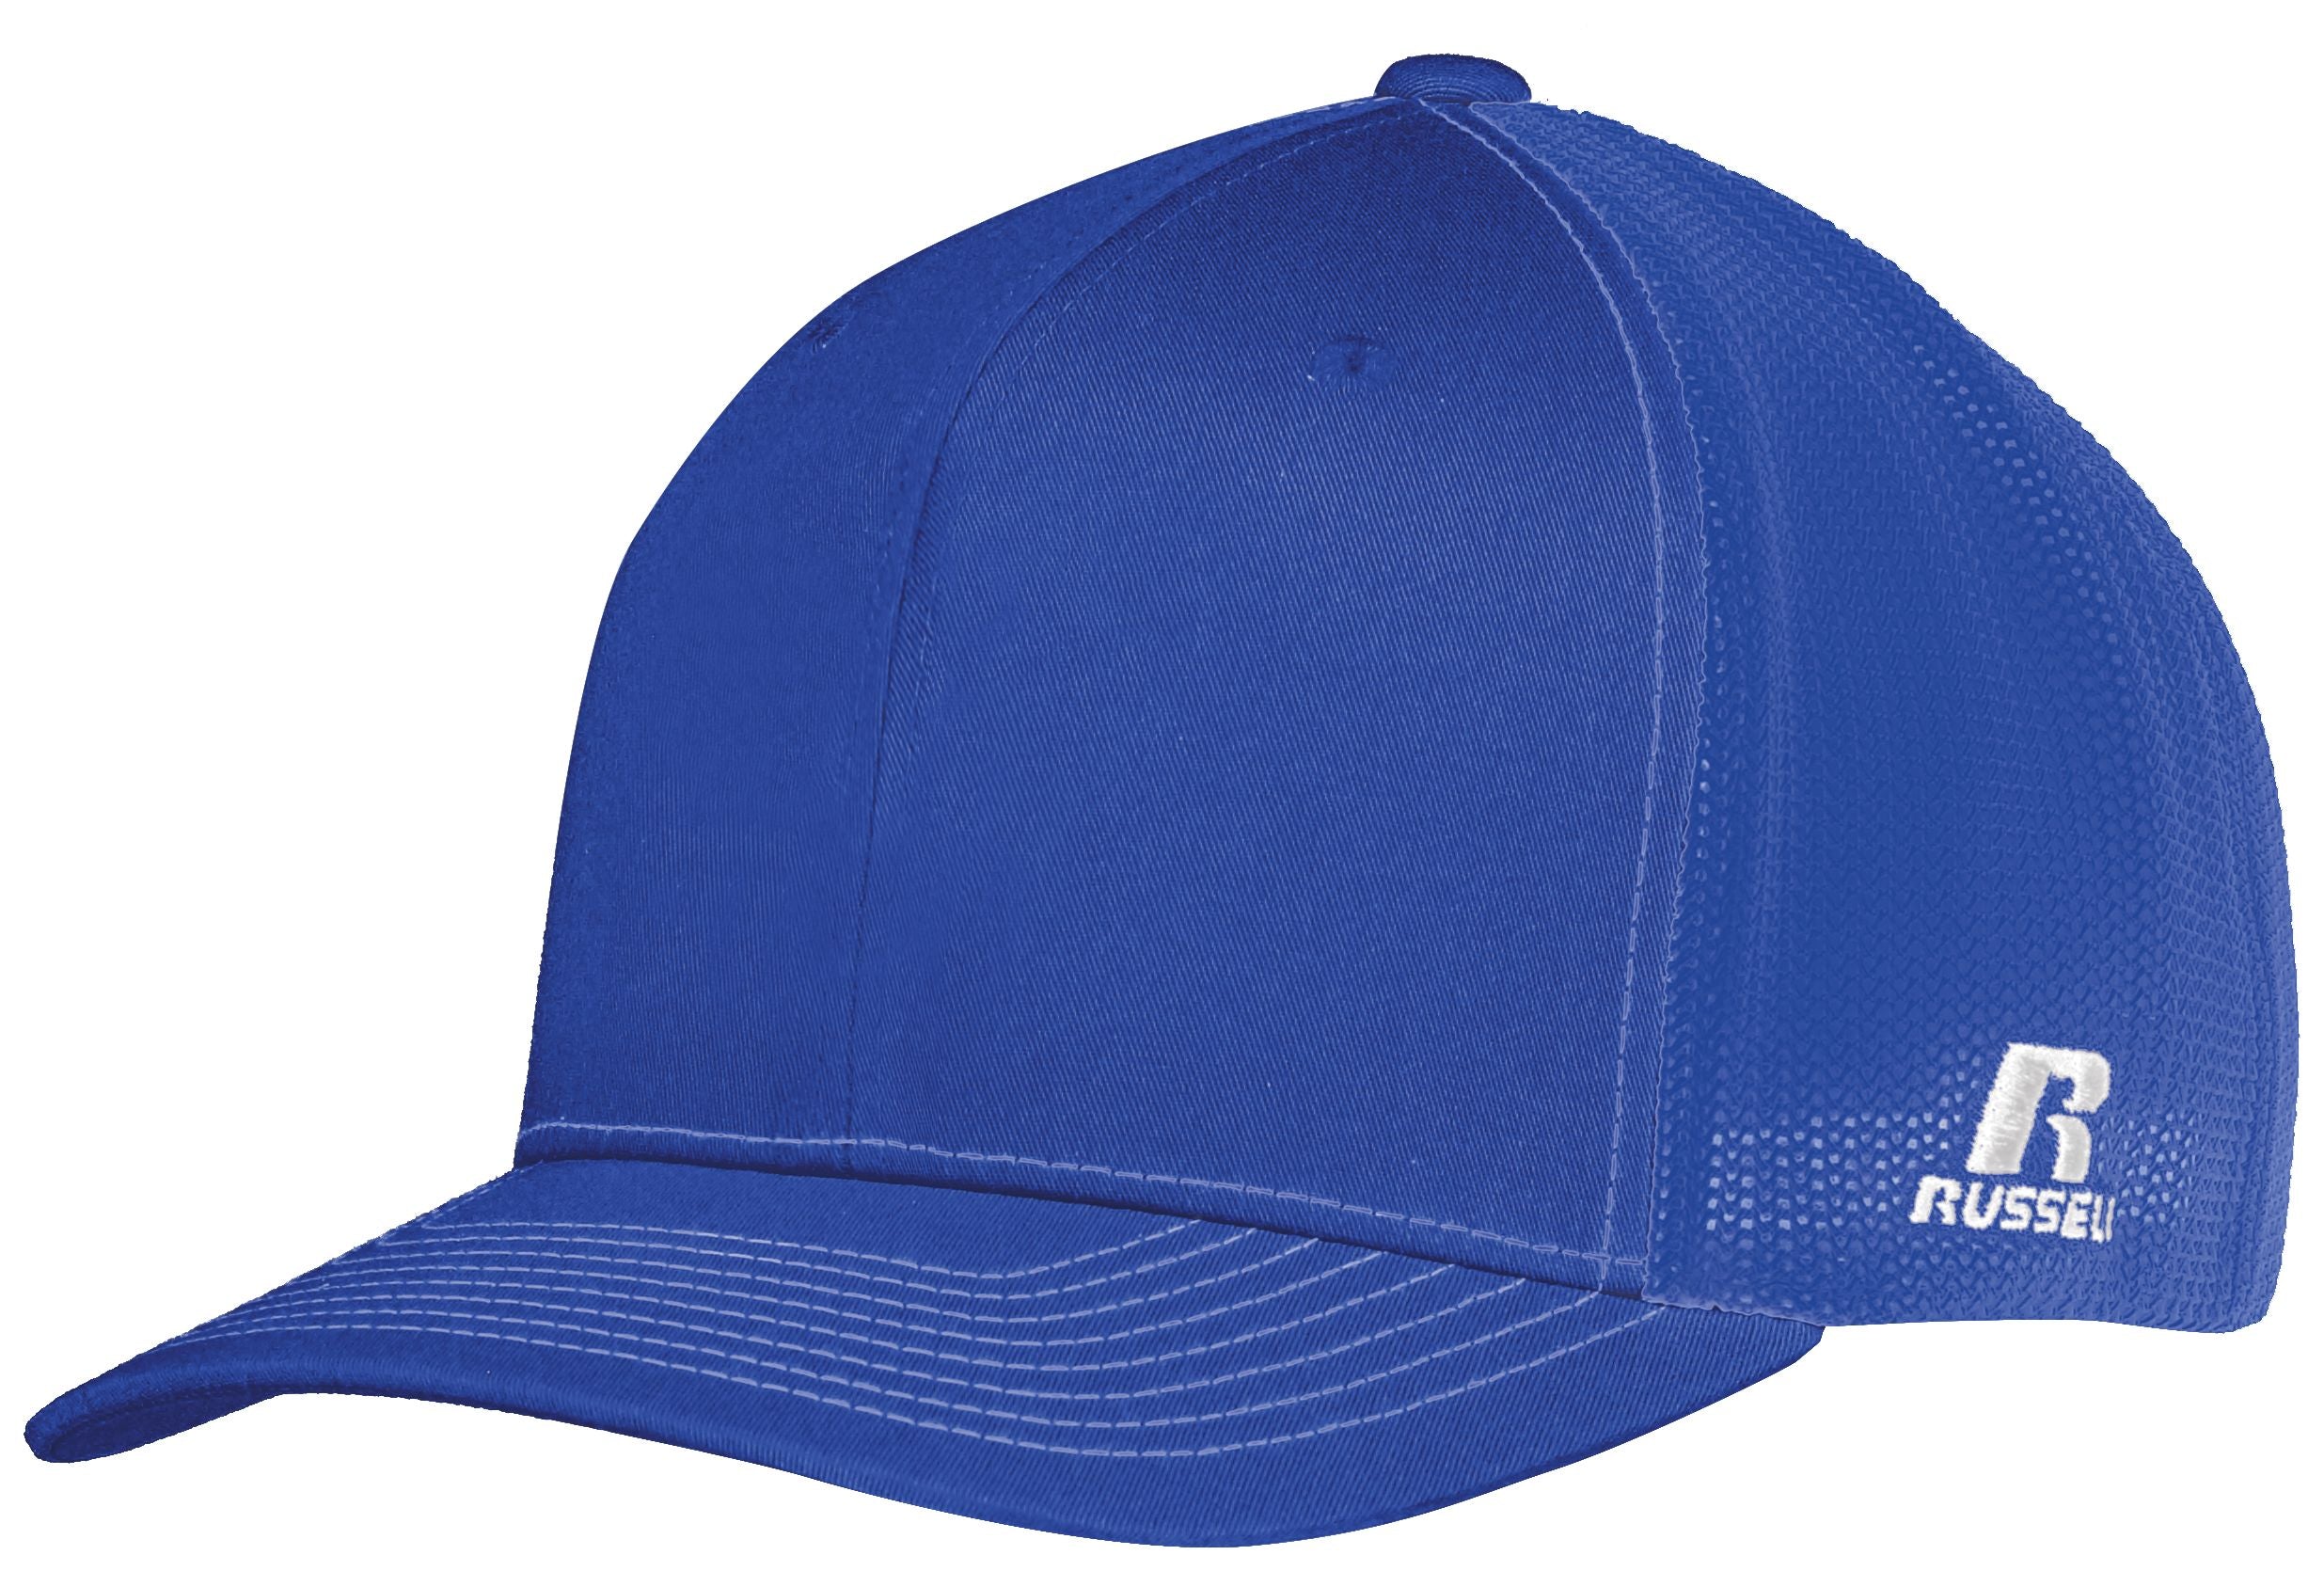 Russell Athletic Flexfit Twill Mesh Cap in Royal  -Part of the Adult, Headwear, Headwear-Cap, Russell-Athletic-Products product lines at KanaleyCreations.com